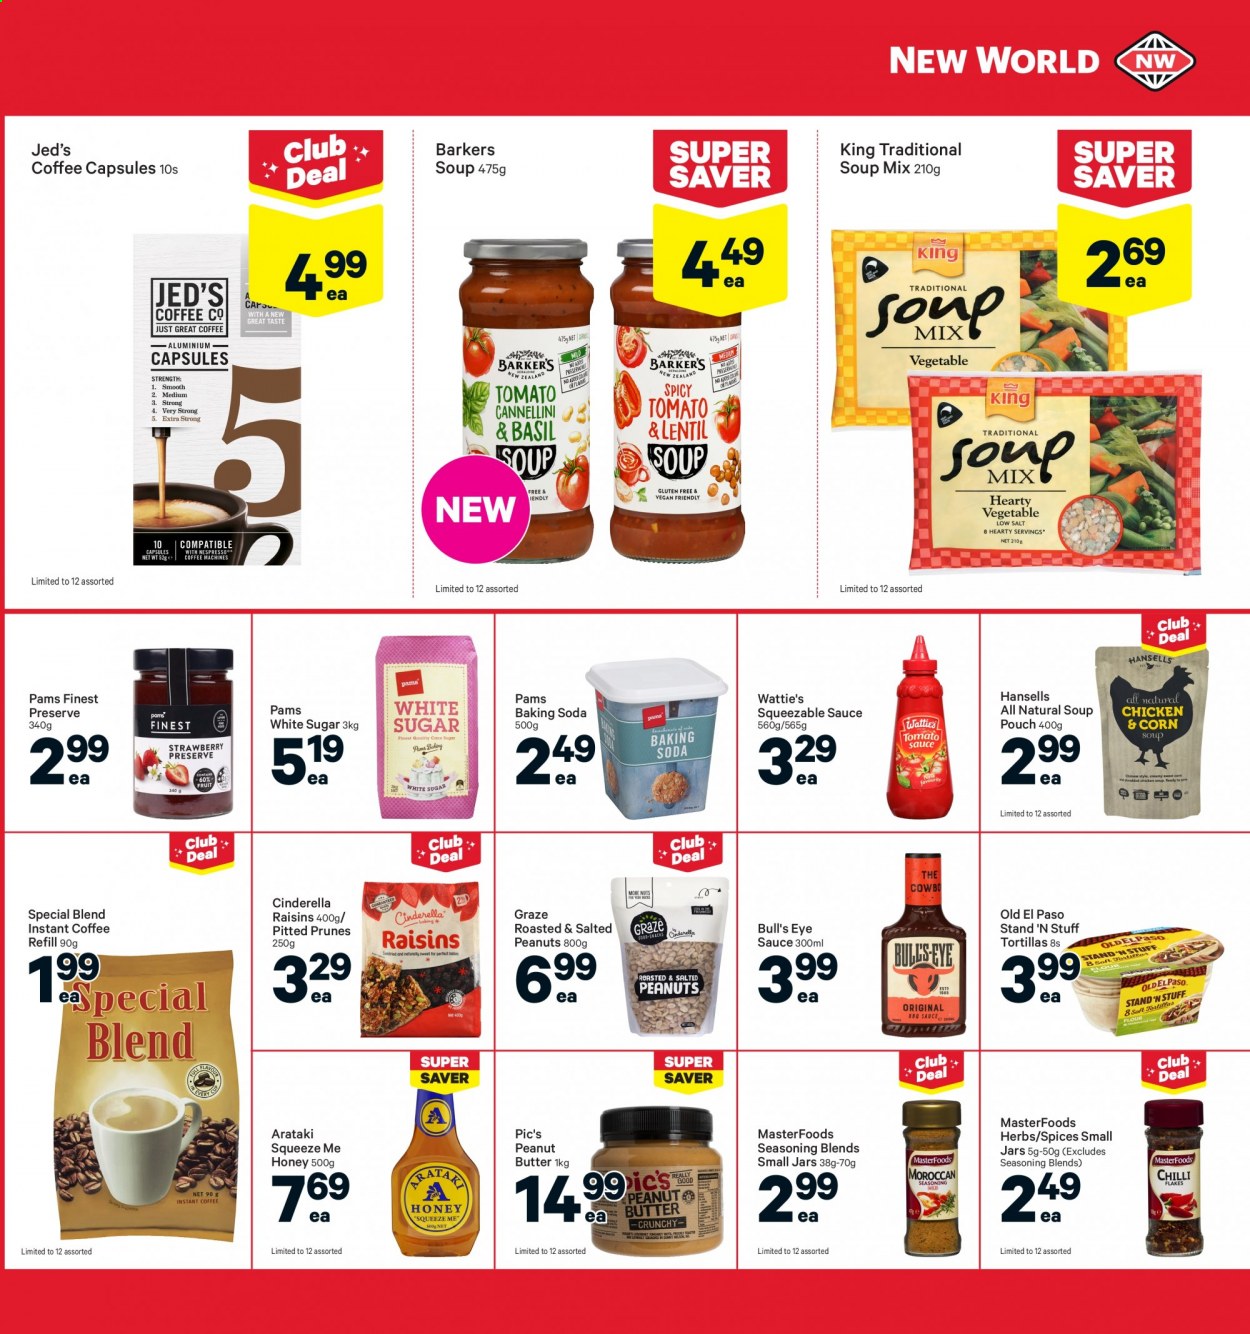 thumbnail - New World mailer - 21.06.2021 - 27.06.2021 - Sales products - tortillas, Old El Paso, soup mix, soup, sauce, Wattie's, bicarbonate of soda, sugar, spice, herbs, honey, peanut butter, raisins, prunes, peanuts, dried fruit, Graze, instant coffee, coffee capsules. Page 15.